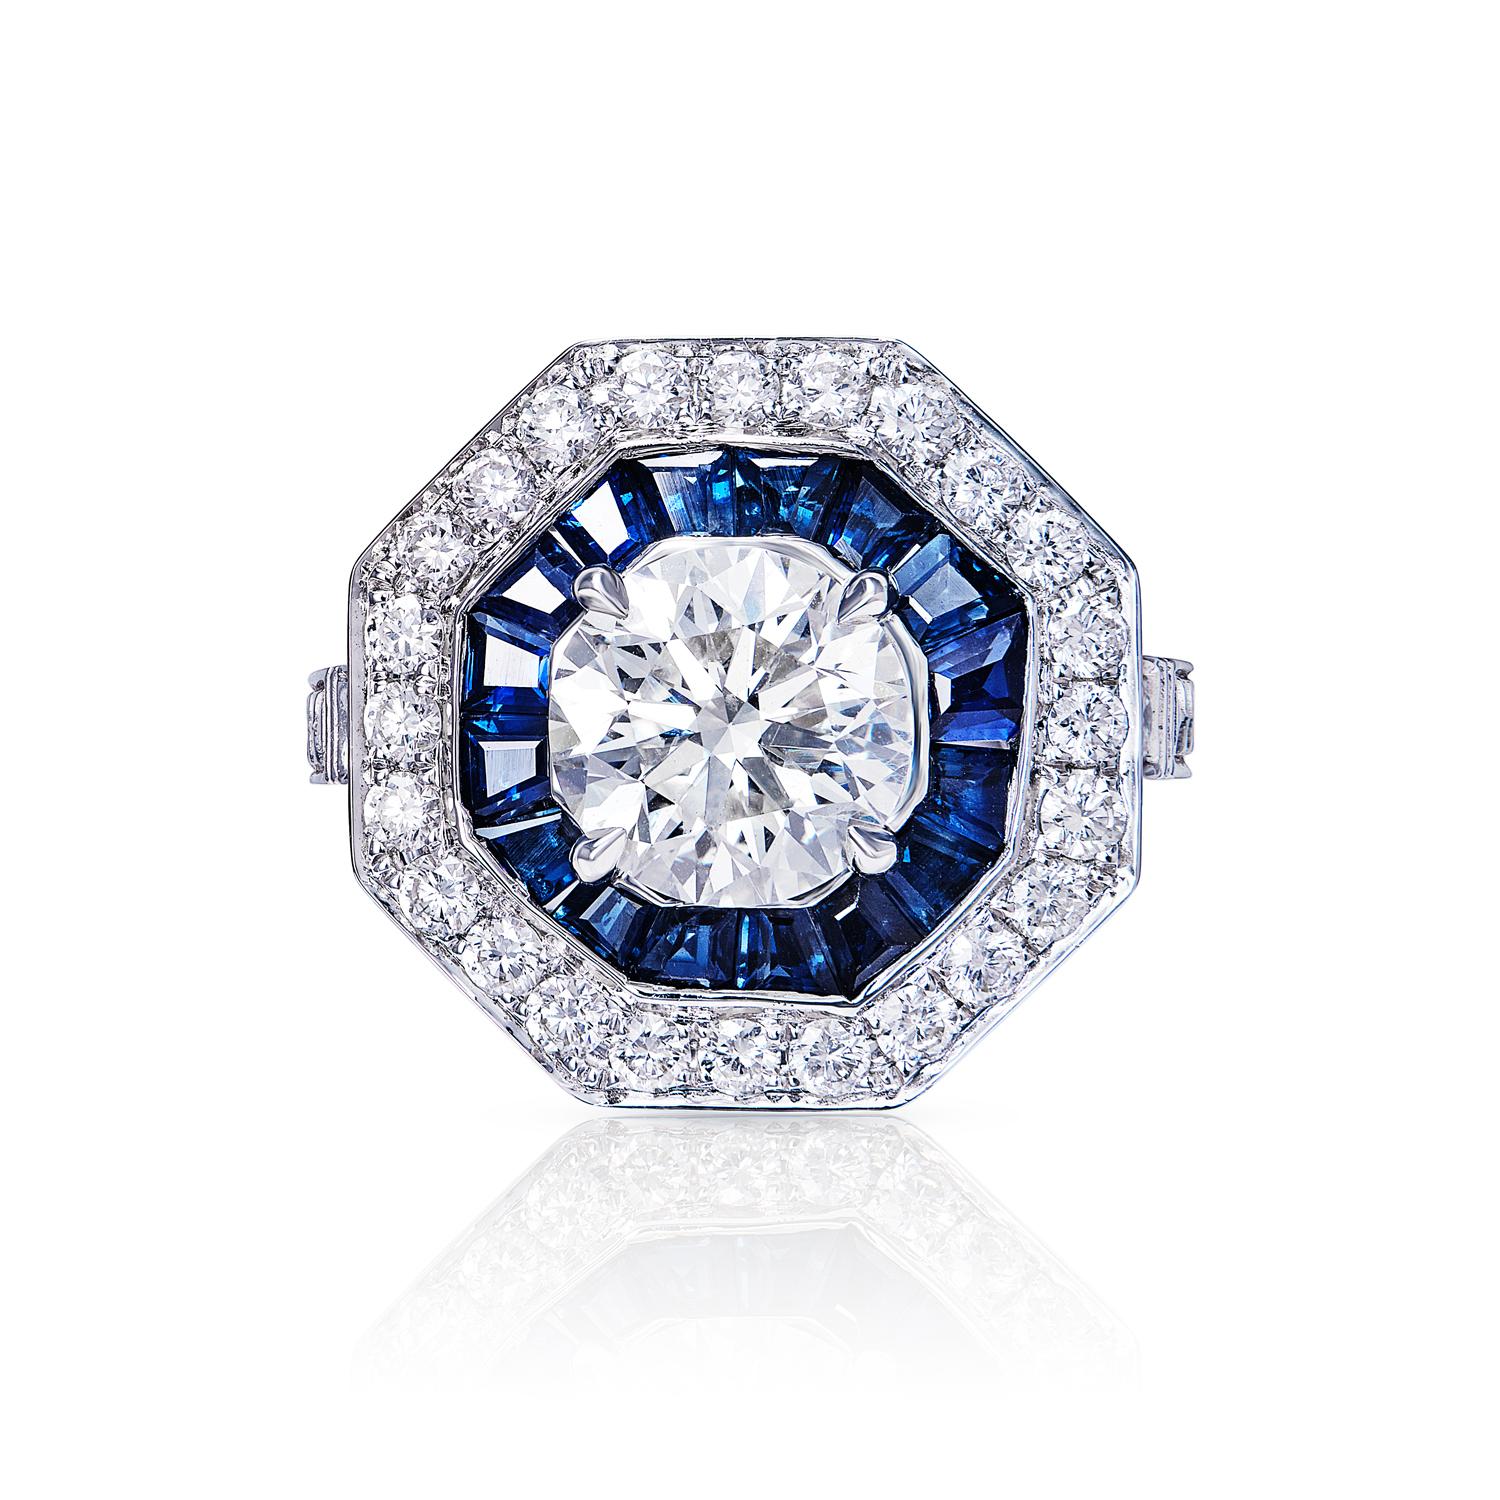 If you're looking for a Vintage Style diamond ring that's truly brilliant, you'll want to check out this certified round brilliant-cut diamond ring. The cut is also very impressive, with 58 facets that make it sparkle and shine. It's set in a simple